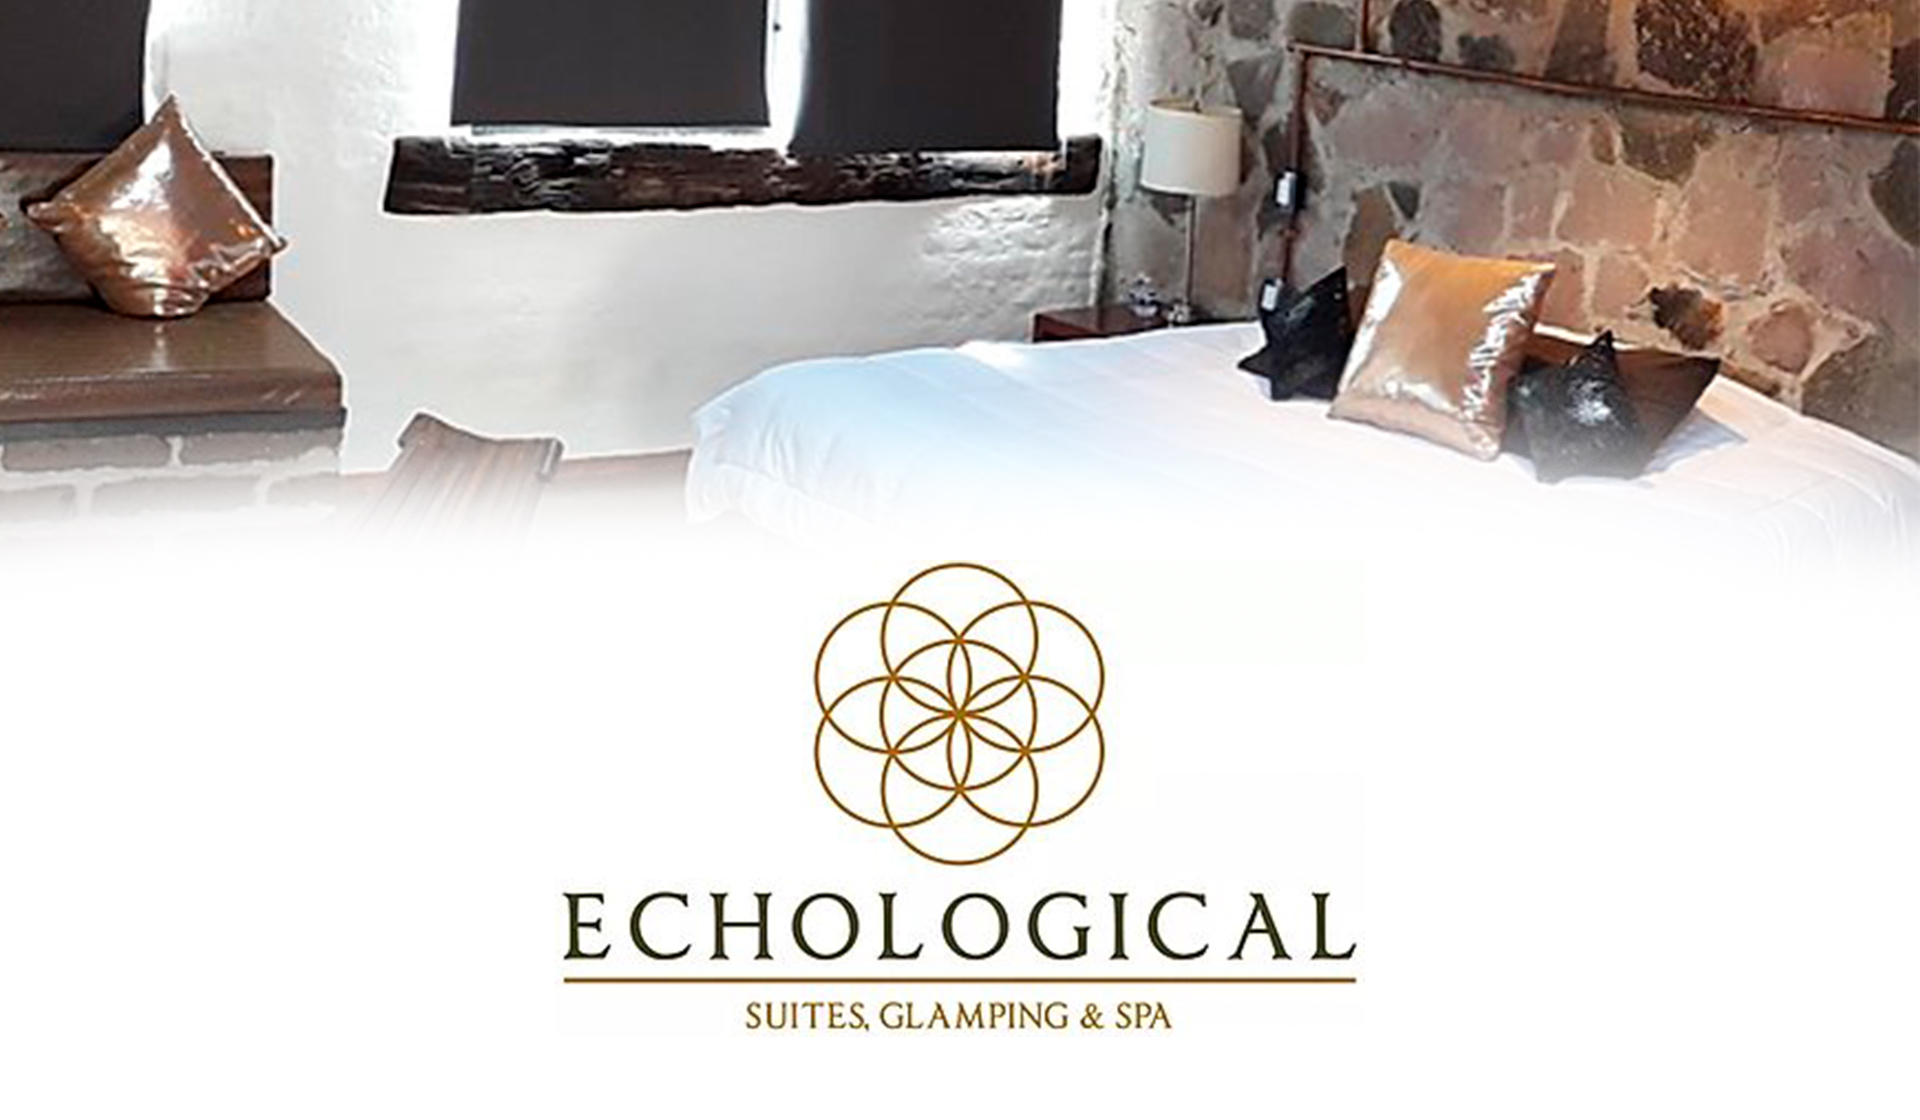 Echological Hotel, Glamping And Spa